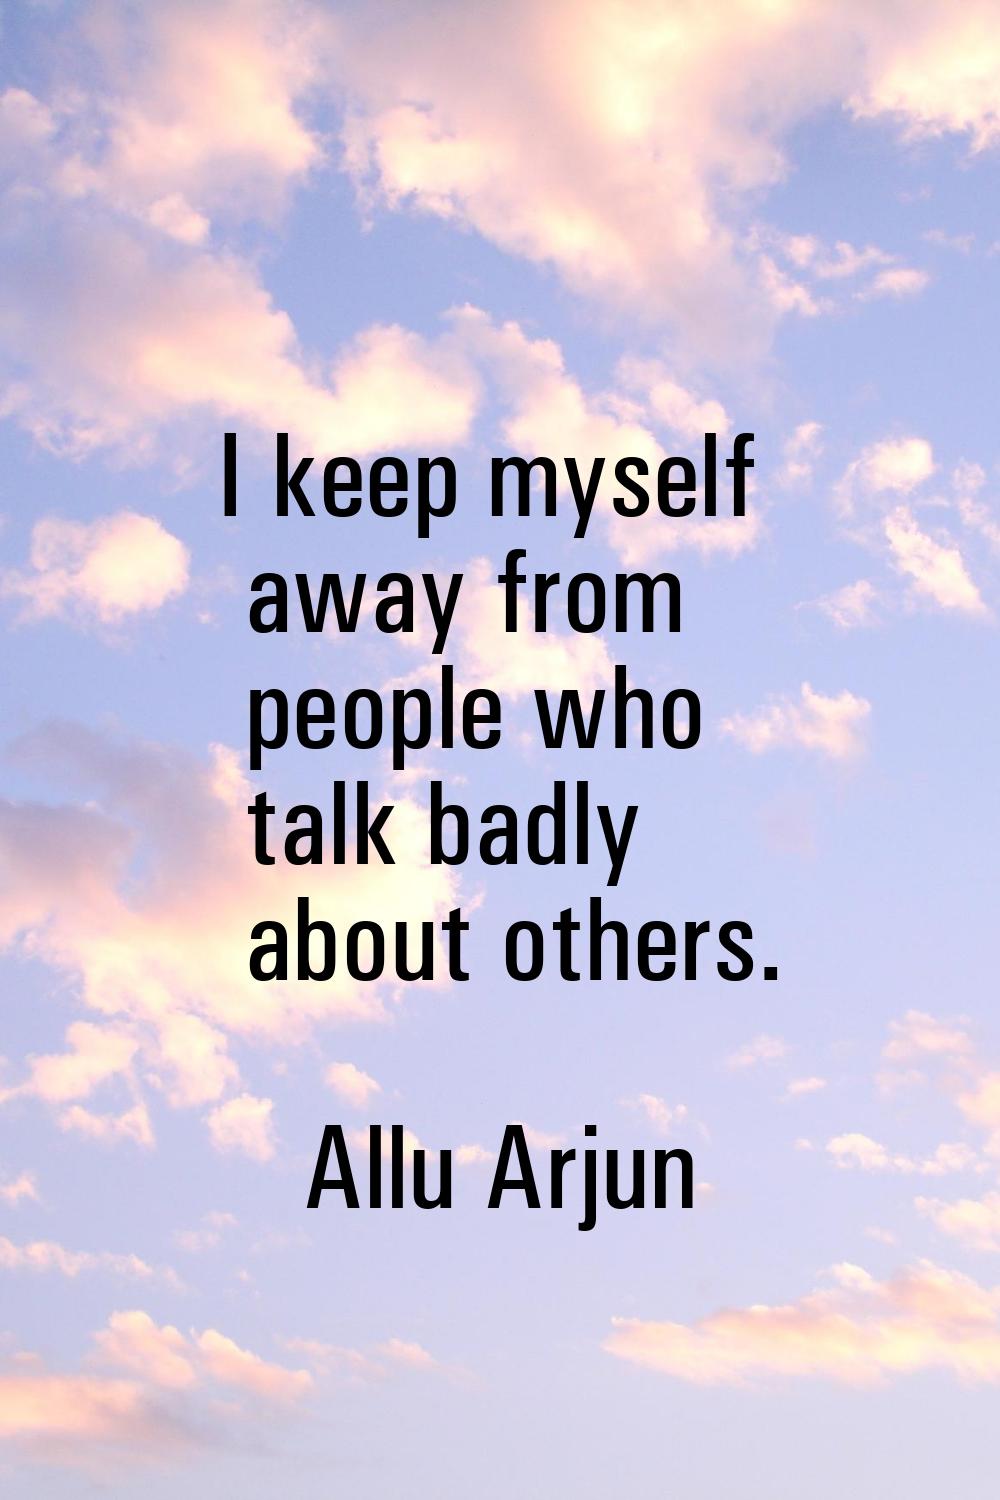 I keep myself away from people who talk badly about others.